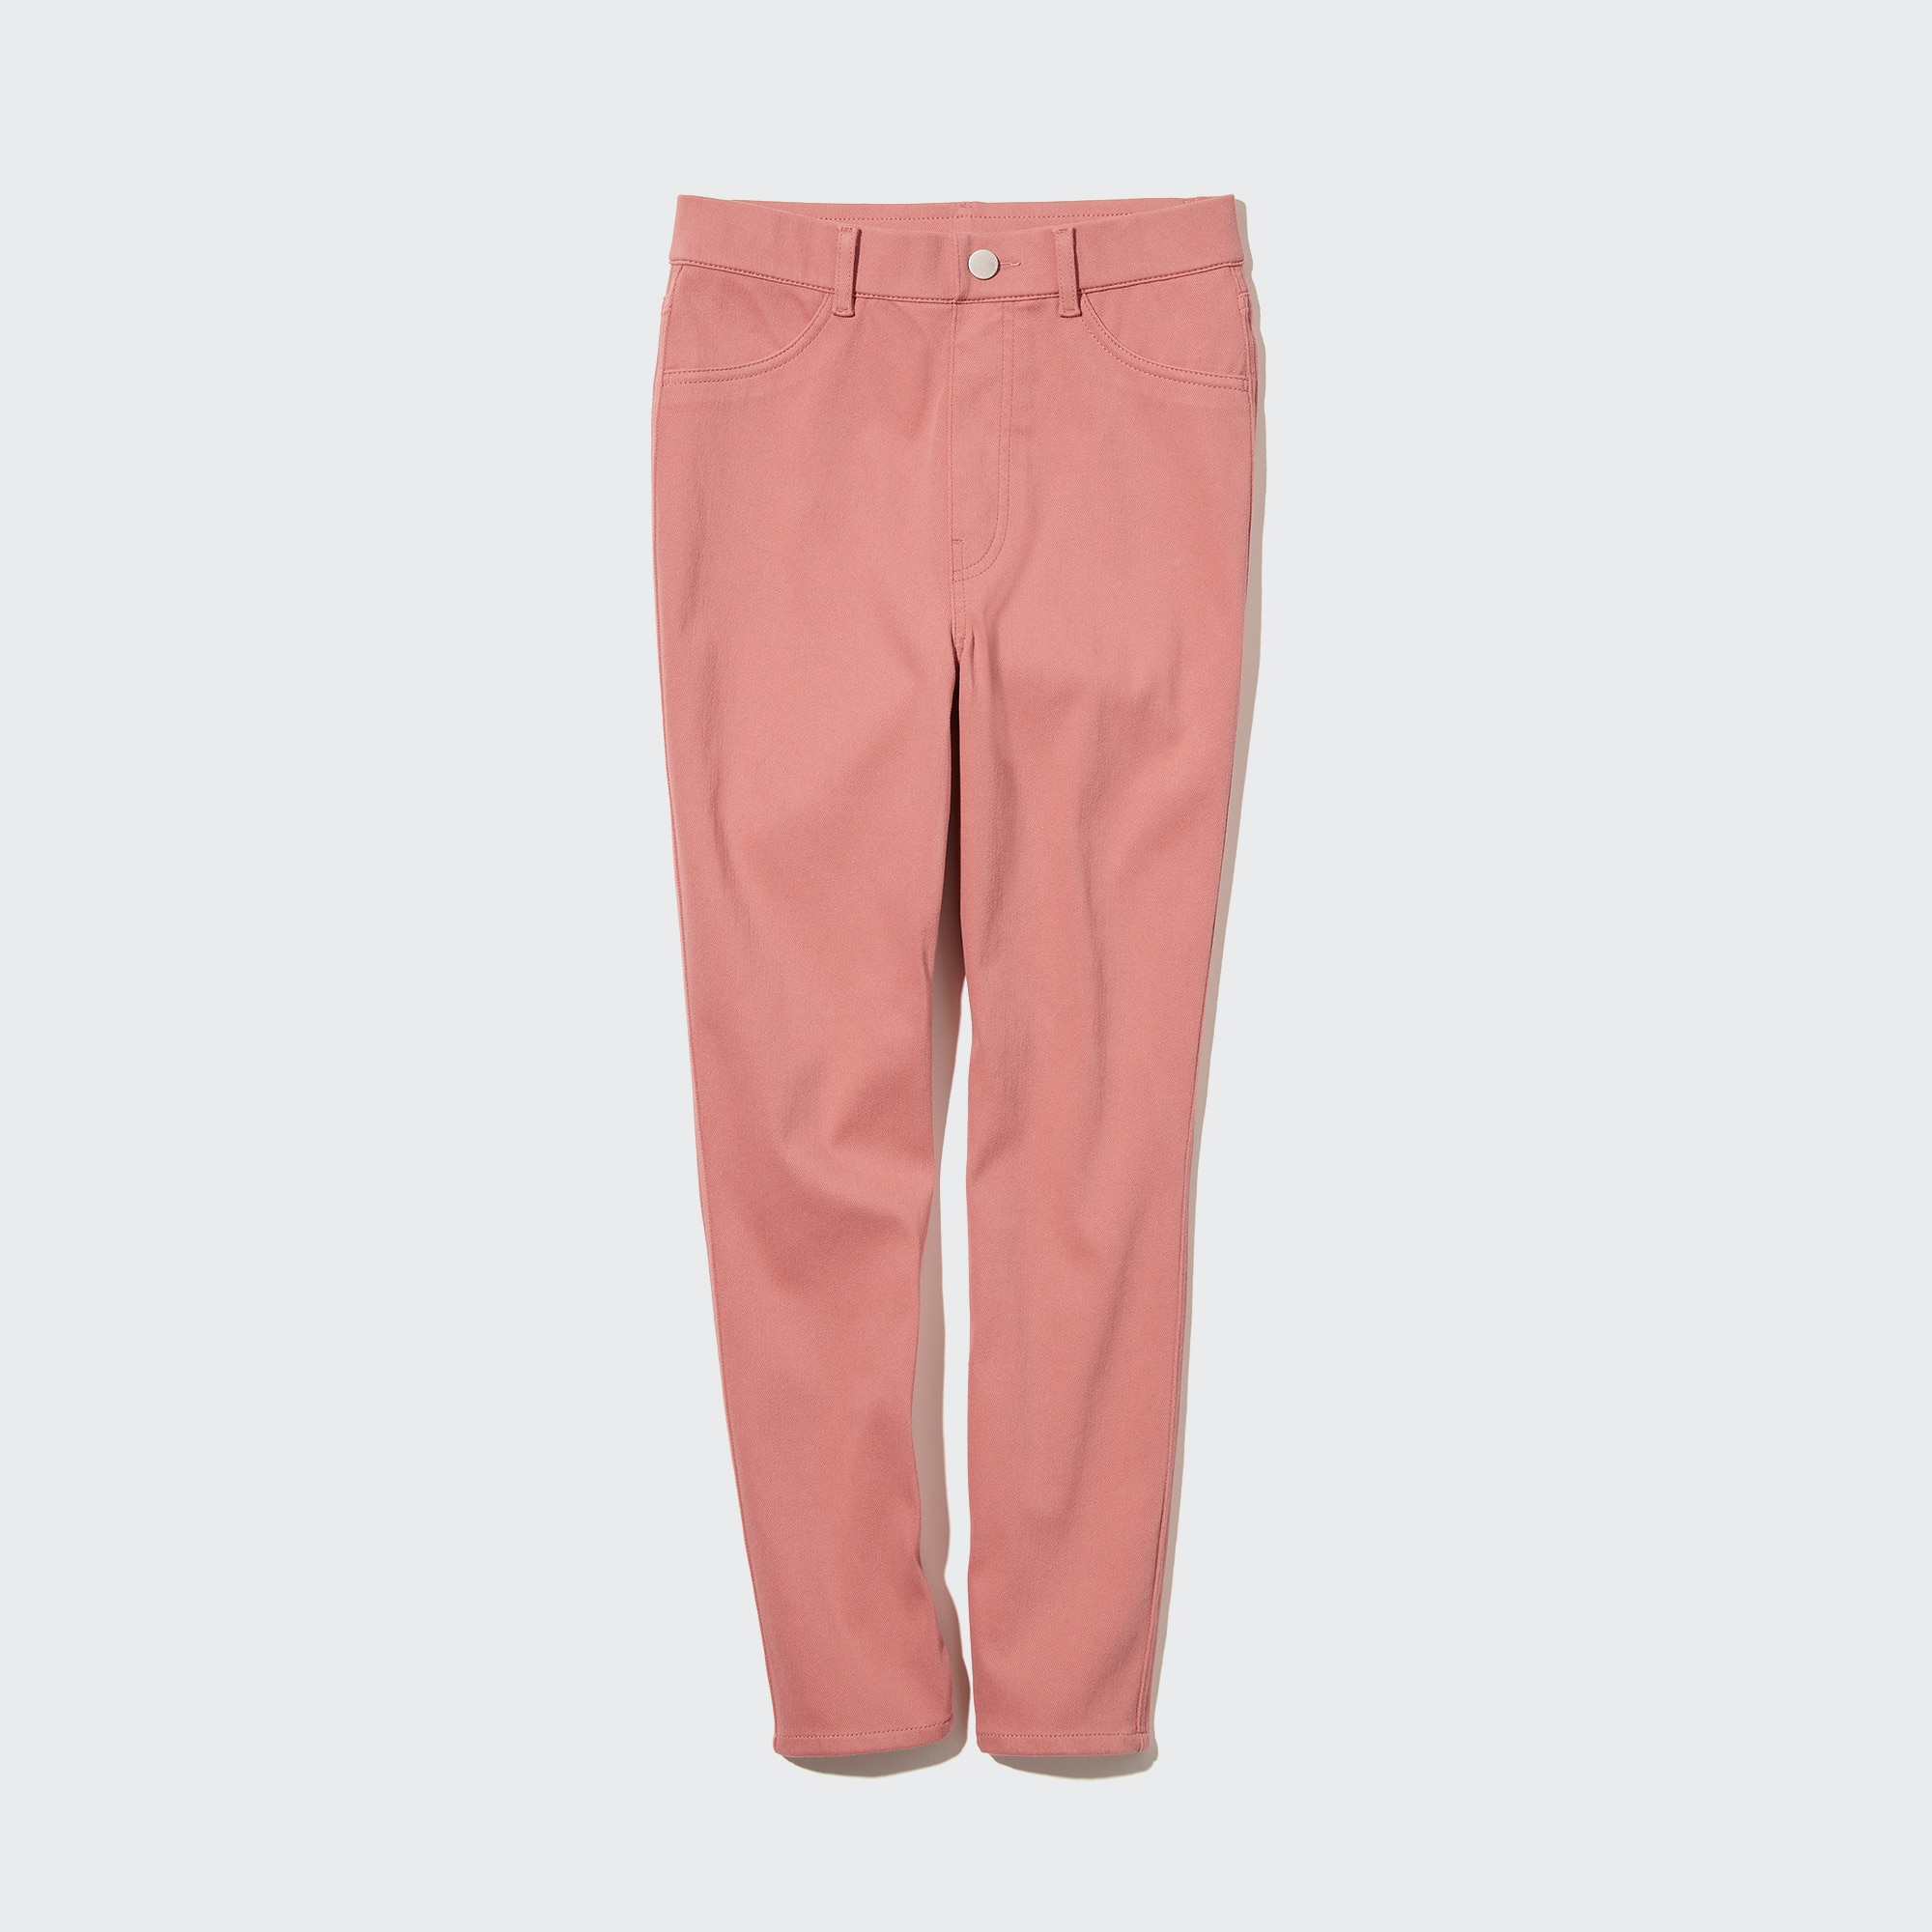 Uniqlo WOMEN Ultra Stretch Cropped - Hpa-an online shop